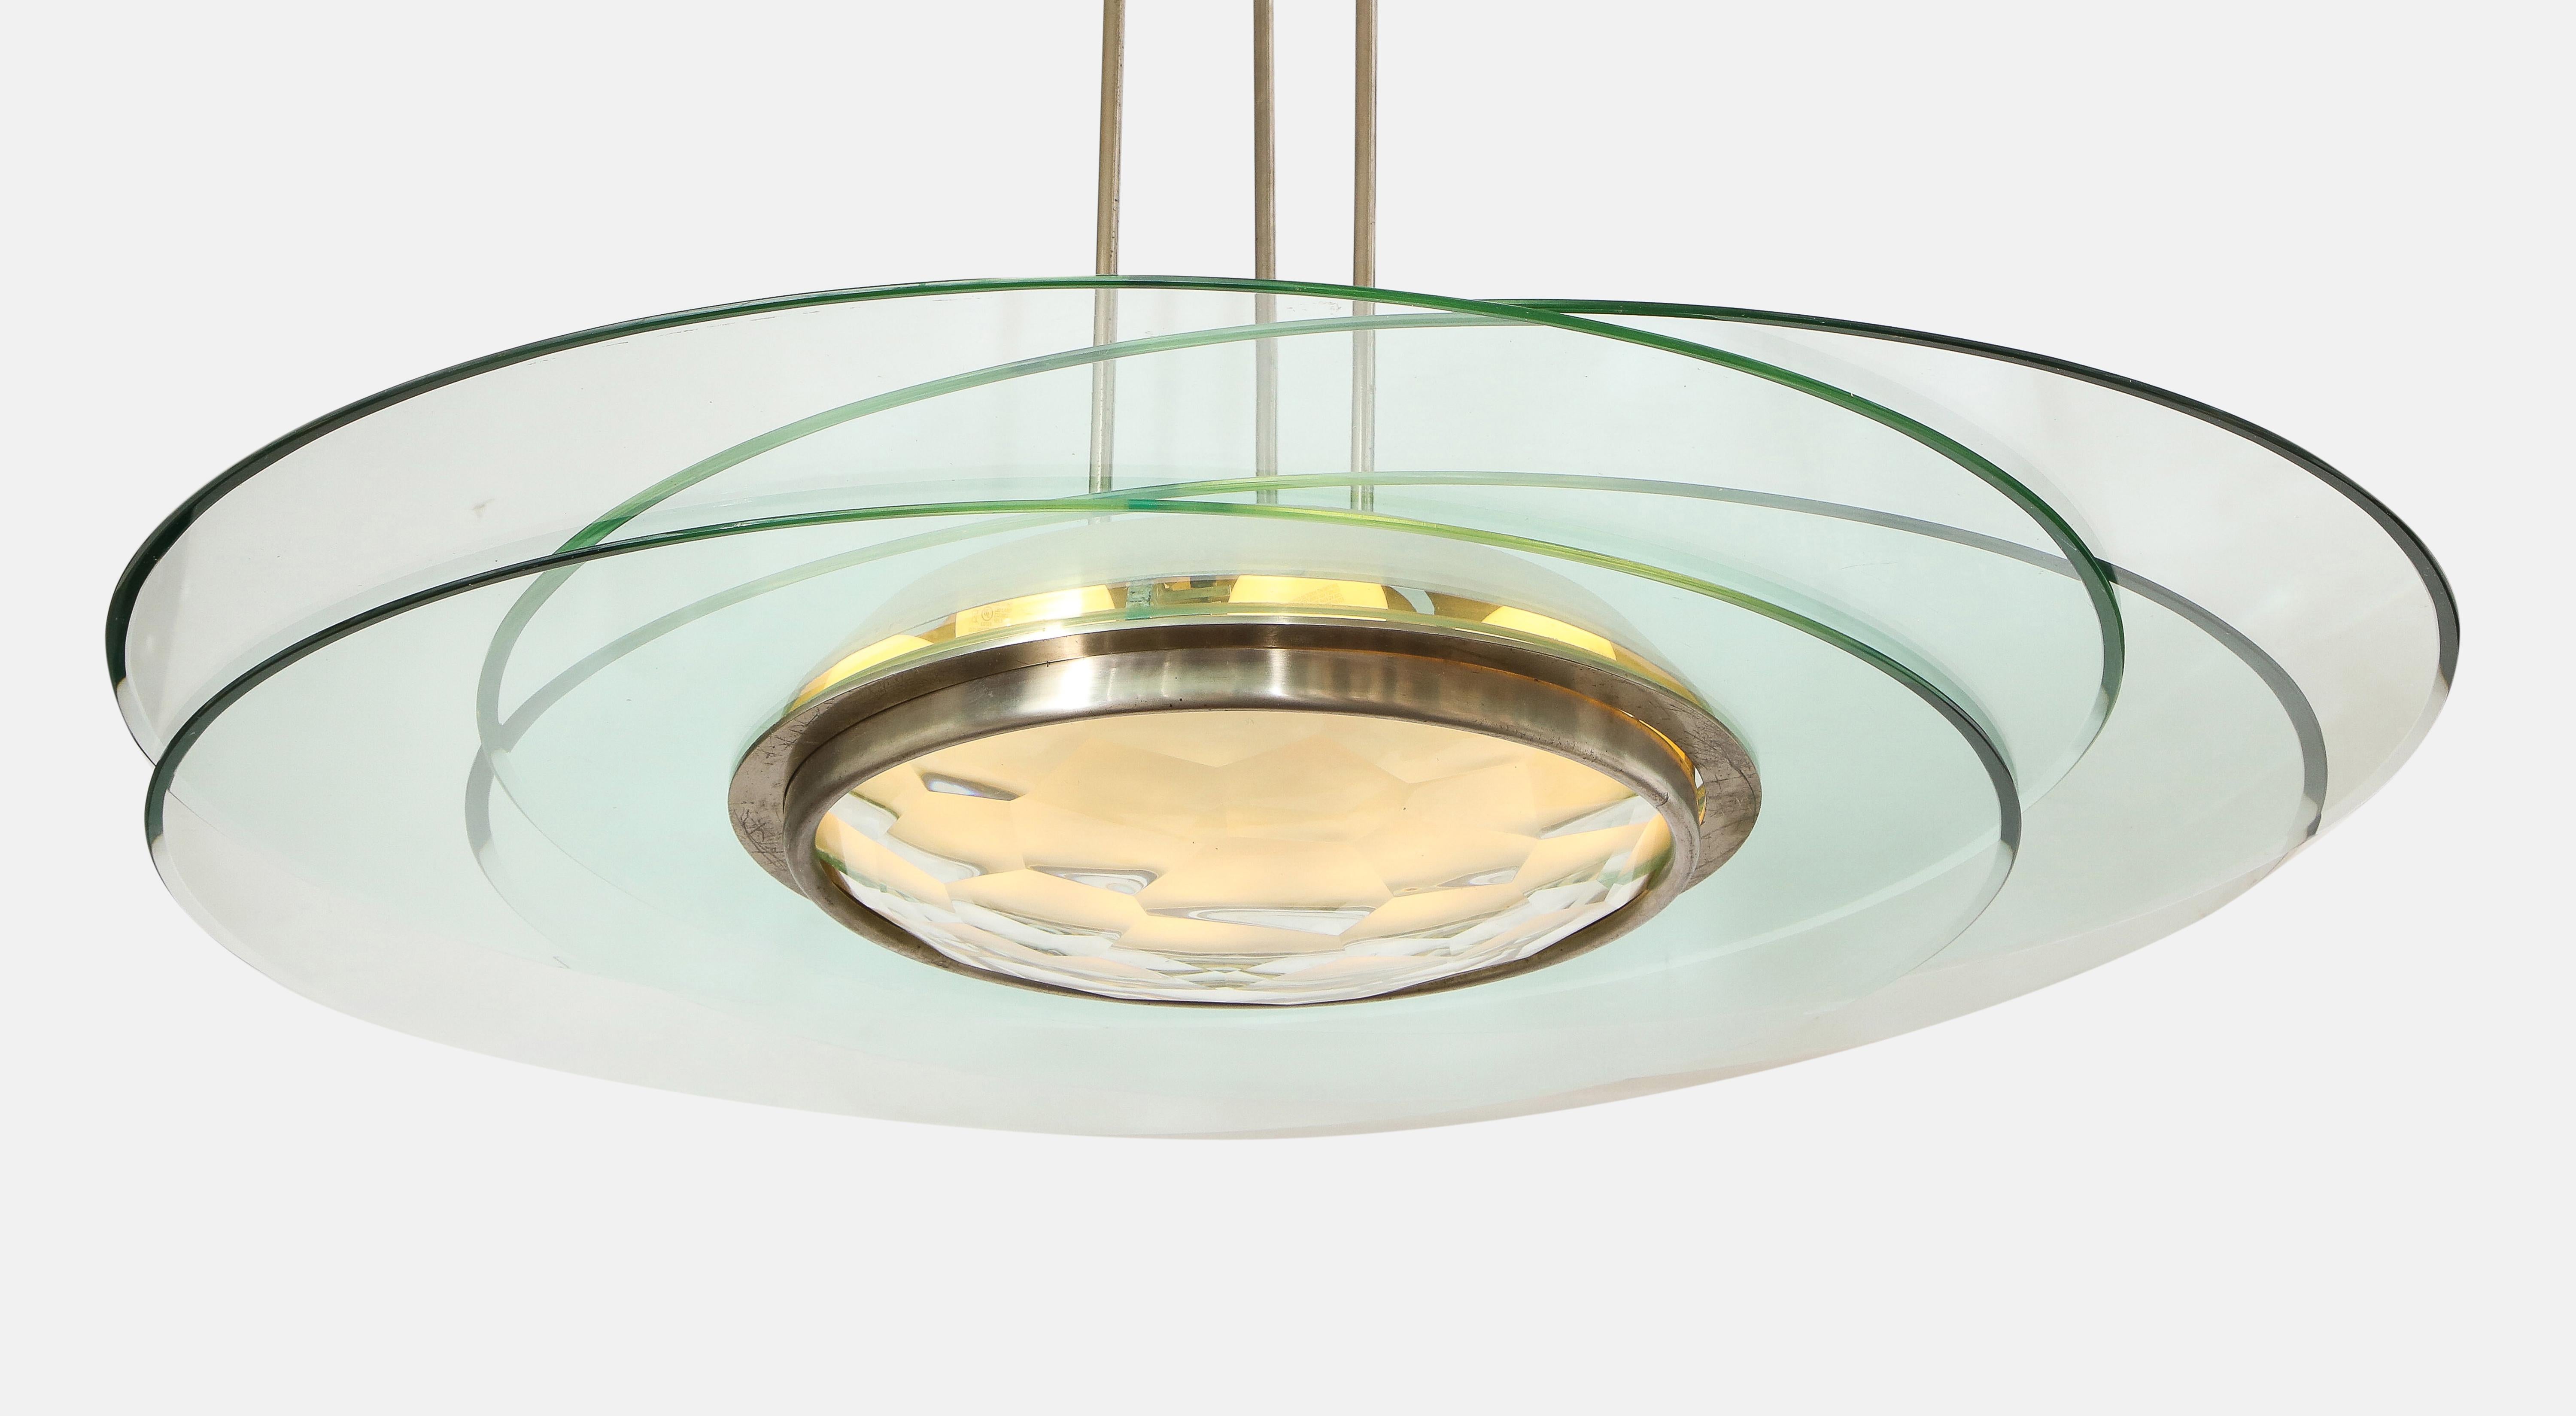 Max Ingrand for Fontana Arte important and rare sculptural chandelier model 2127 consisting of four clear crystal discs with beveled edges that radiate around a nickel-plated brass structure with large central faceted and curved cut glass 